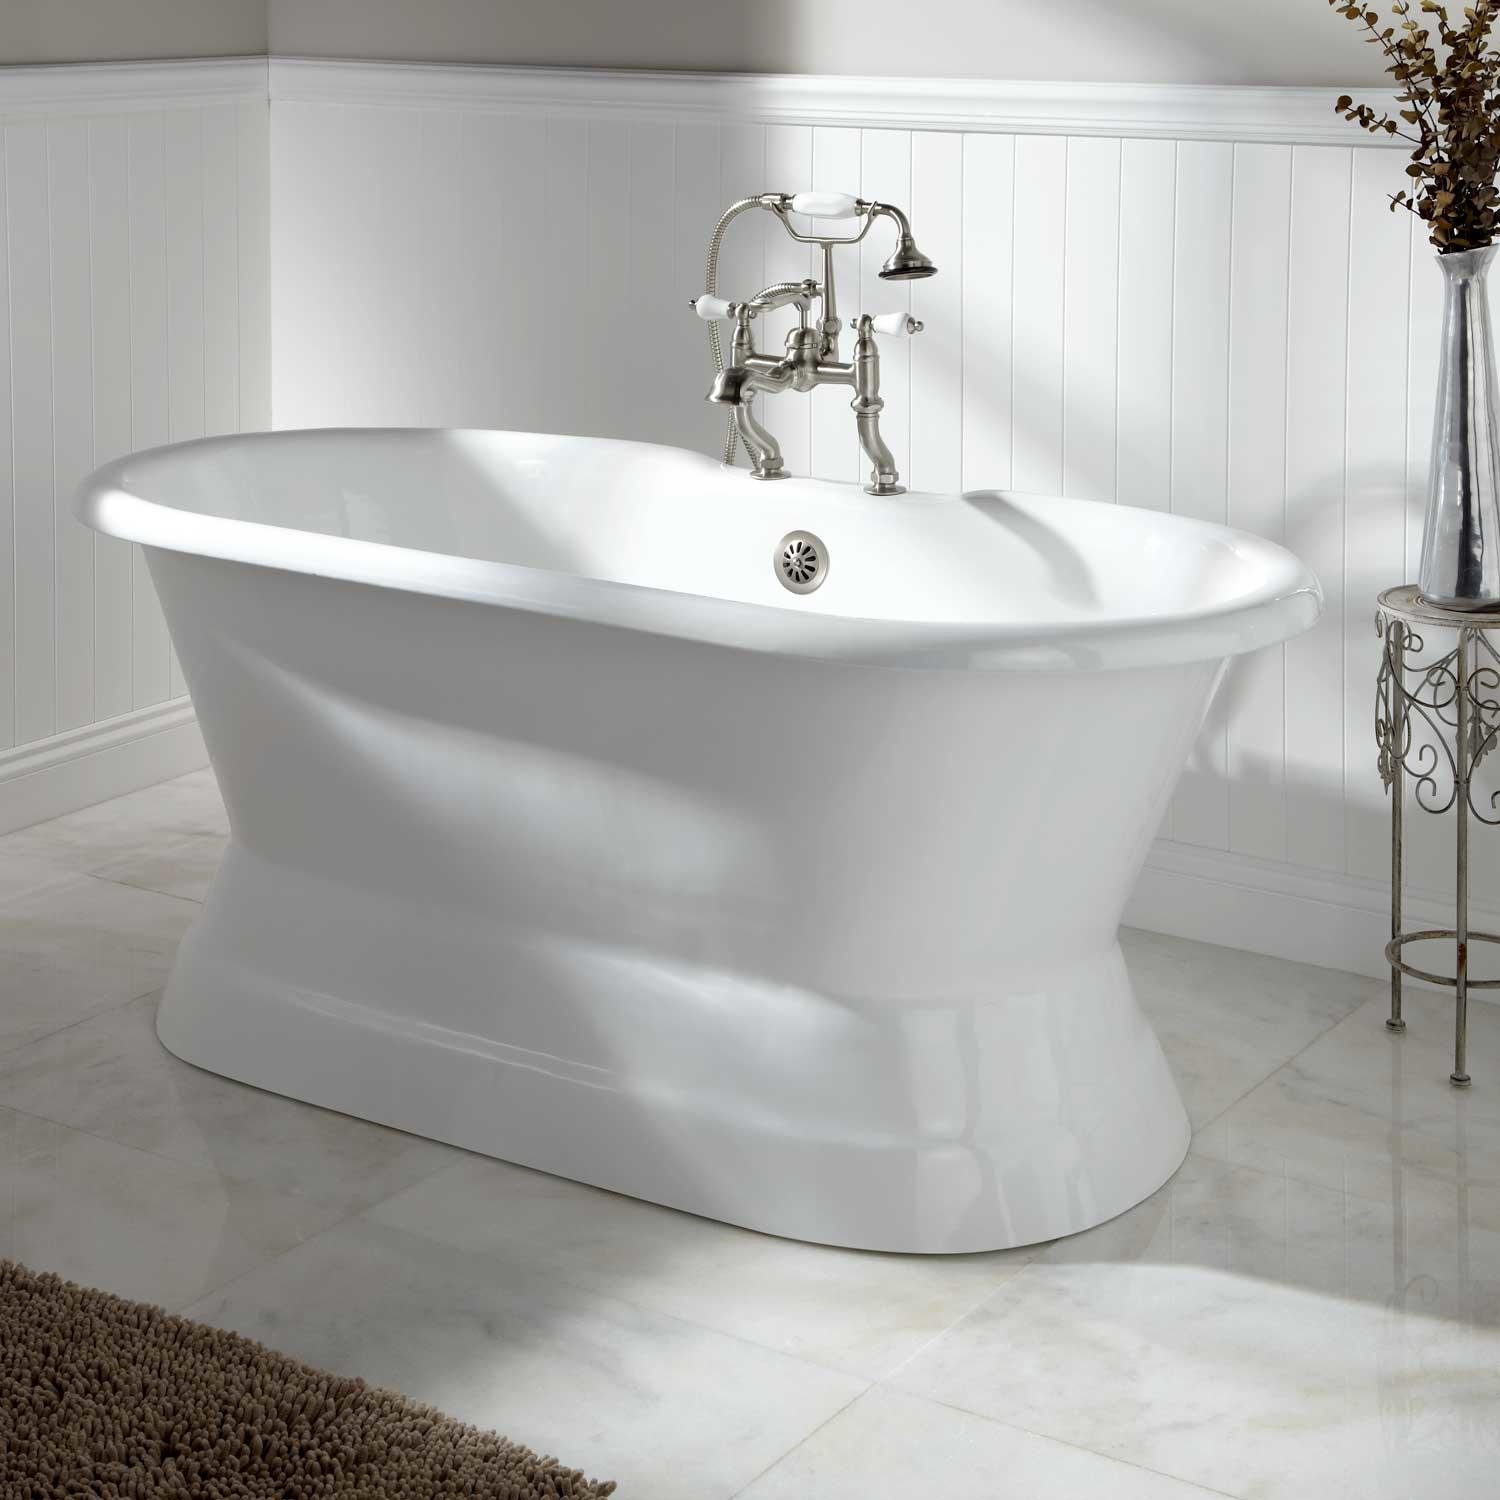 Signature Hardware 275846 Henley 60" Cast Iron Double-Ended Pedestal Tub with Rolled Rim White